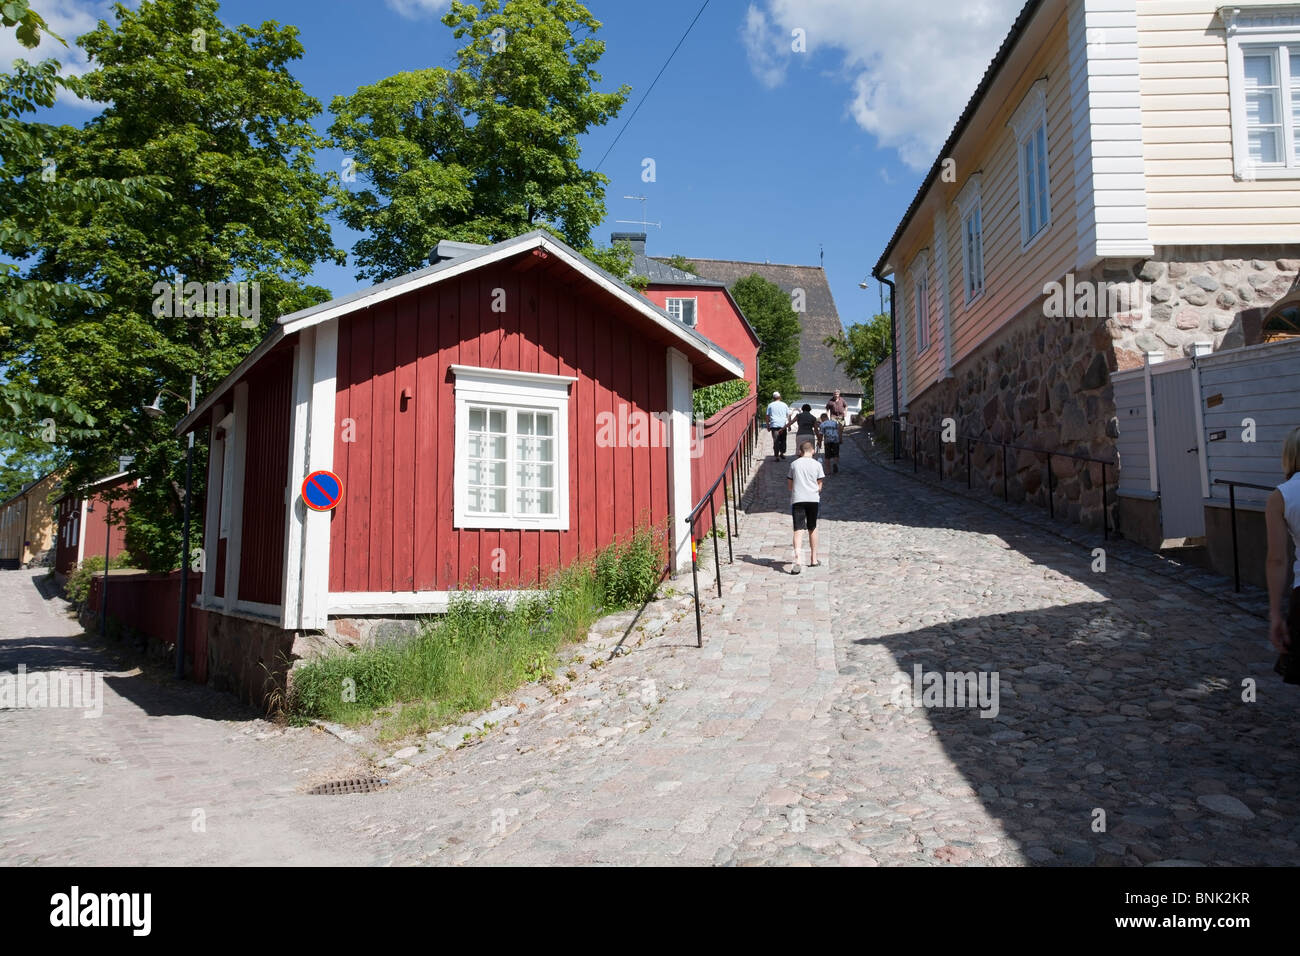 Street view in old town Porvoo Finland Stock Photo